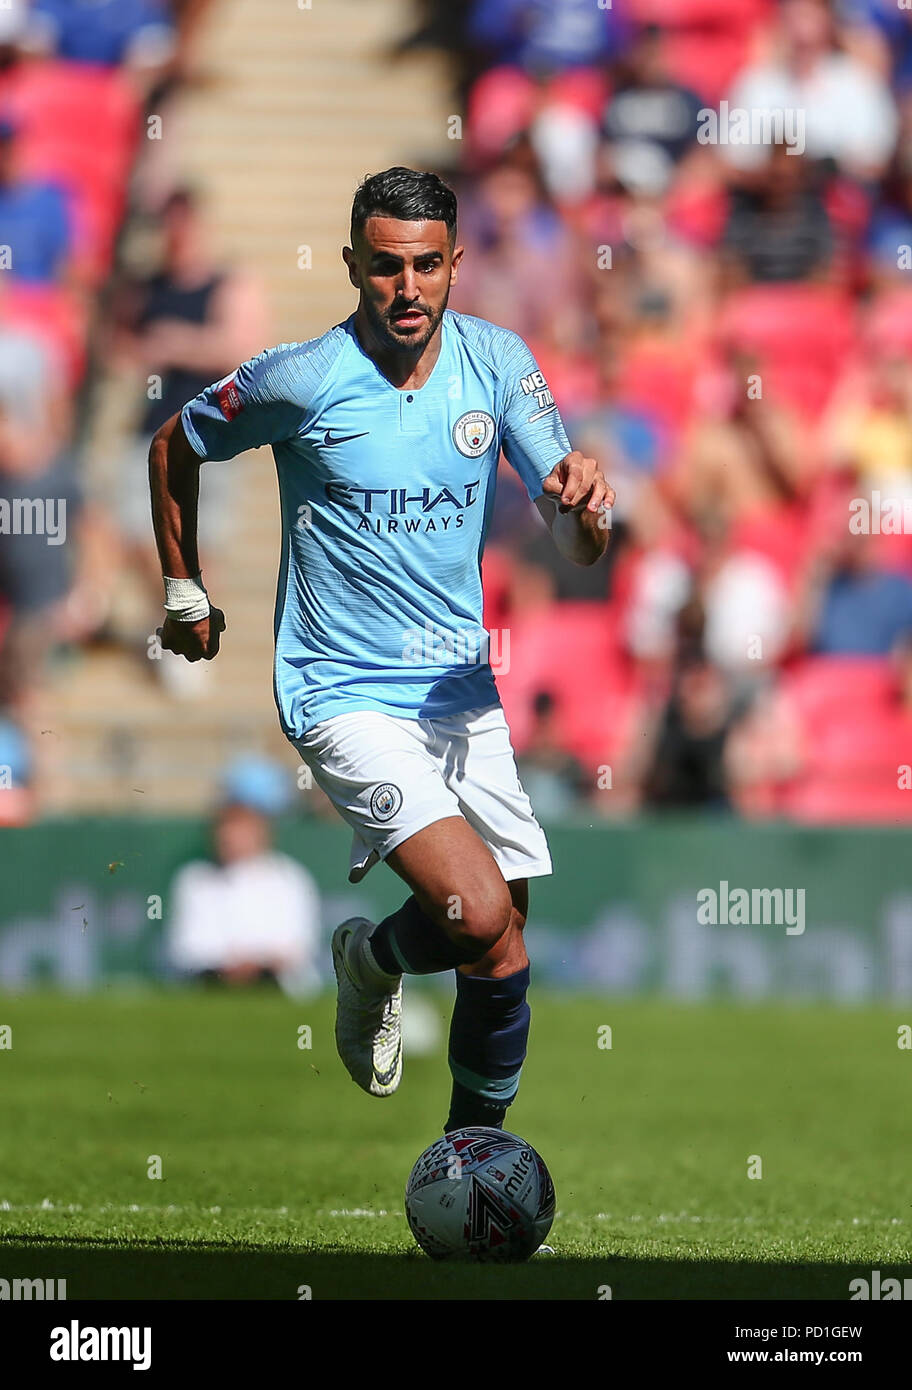 London, UK. 05th Aug, 2018. Riyad Mahrez of Manchester City during the FA Community Shield match between Chelsea and Manchester City at Wembley Stadium on August 5th 2018 in London, England. (Photo by John Rainford/phcimages.com) Credit: PHC Images/Alamy Live News Stock Photo